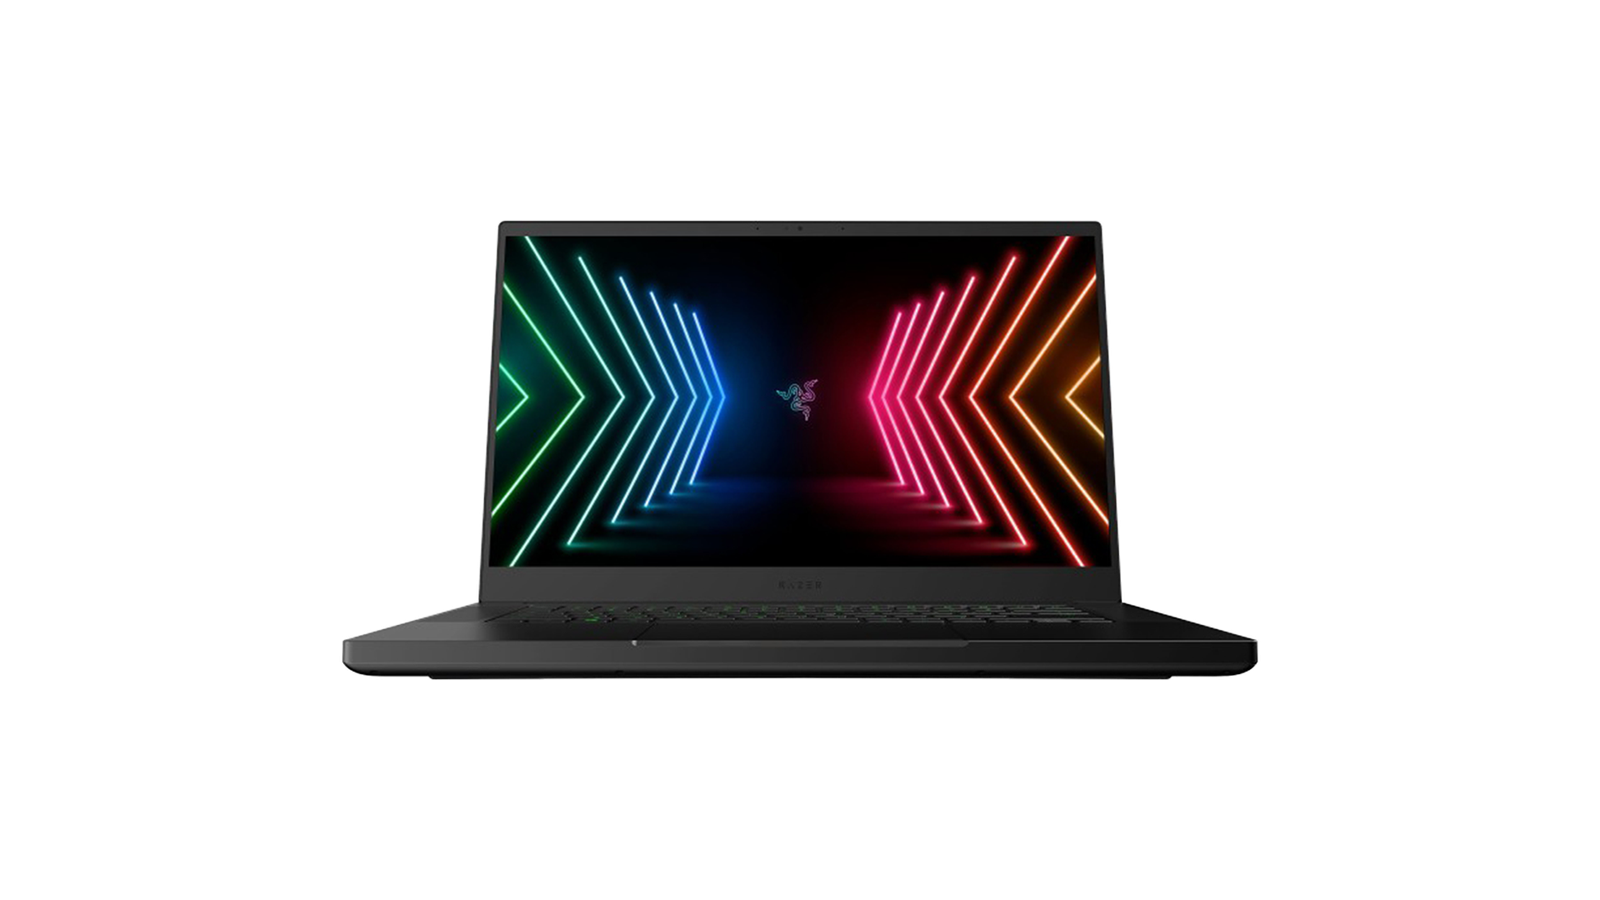  Razer Blade 15 - The best looking laptop for gaming